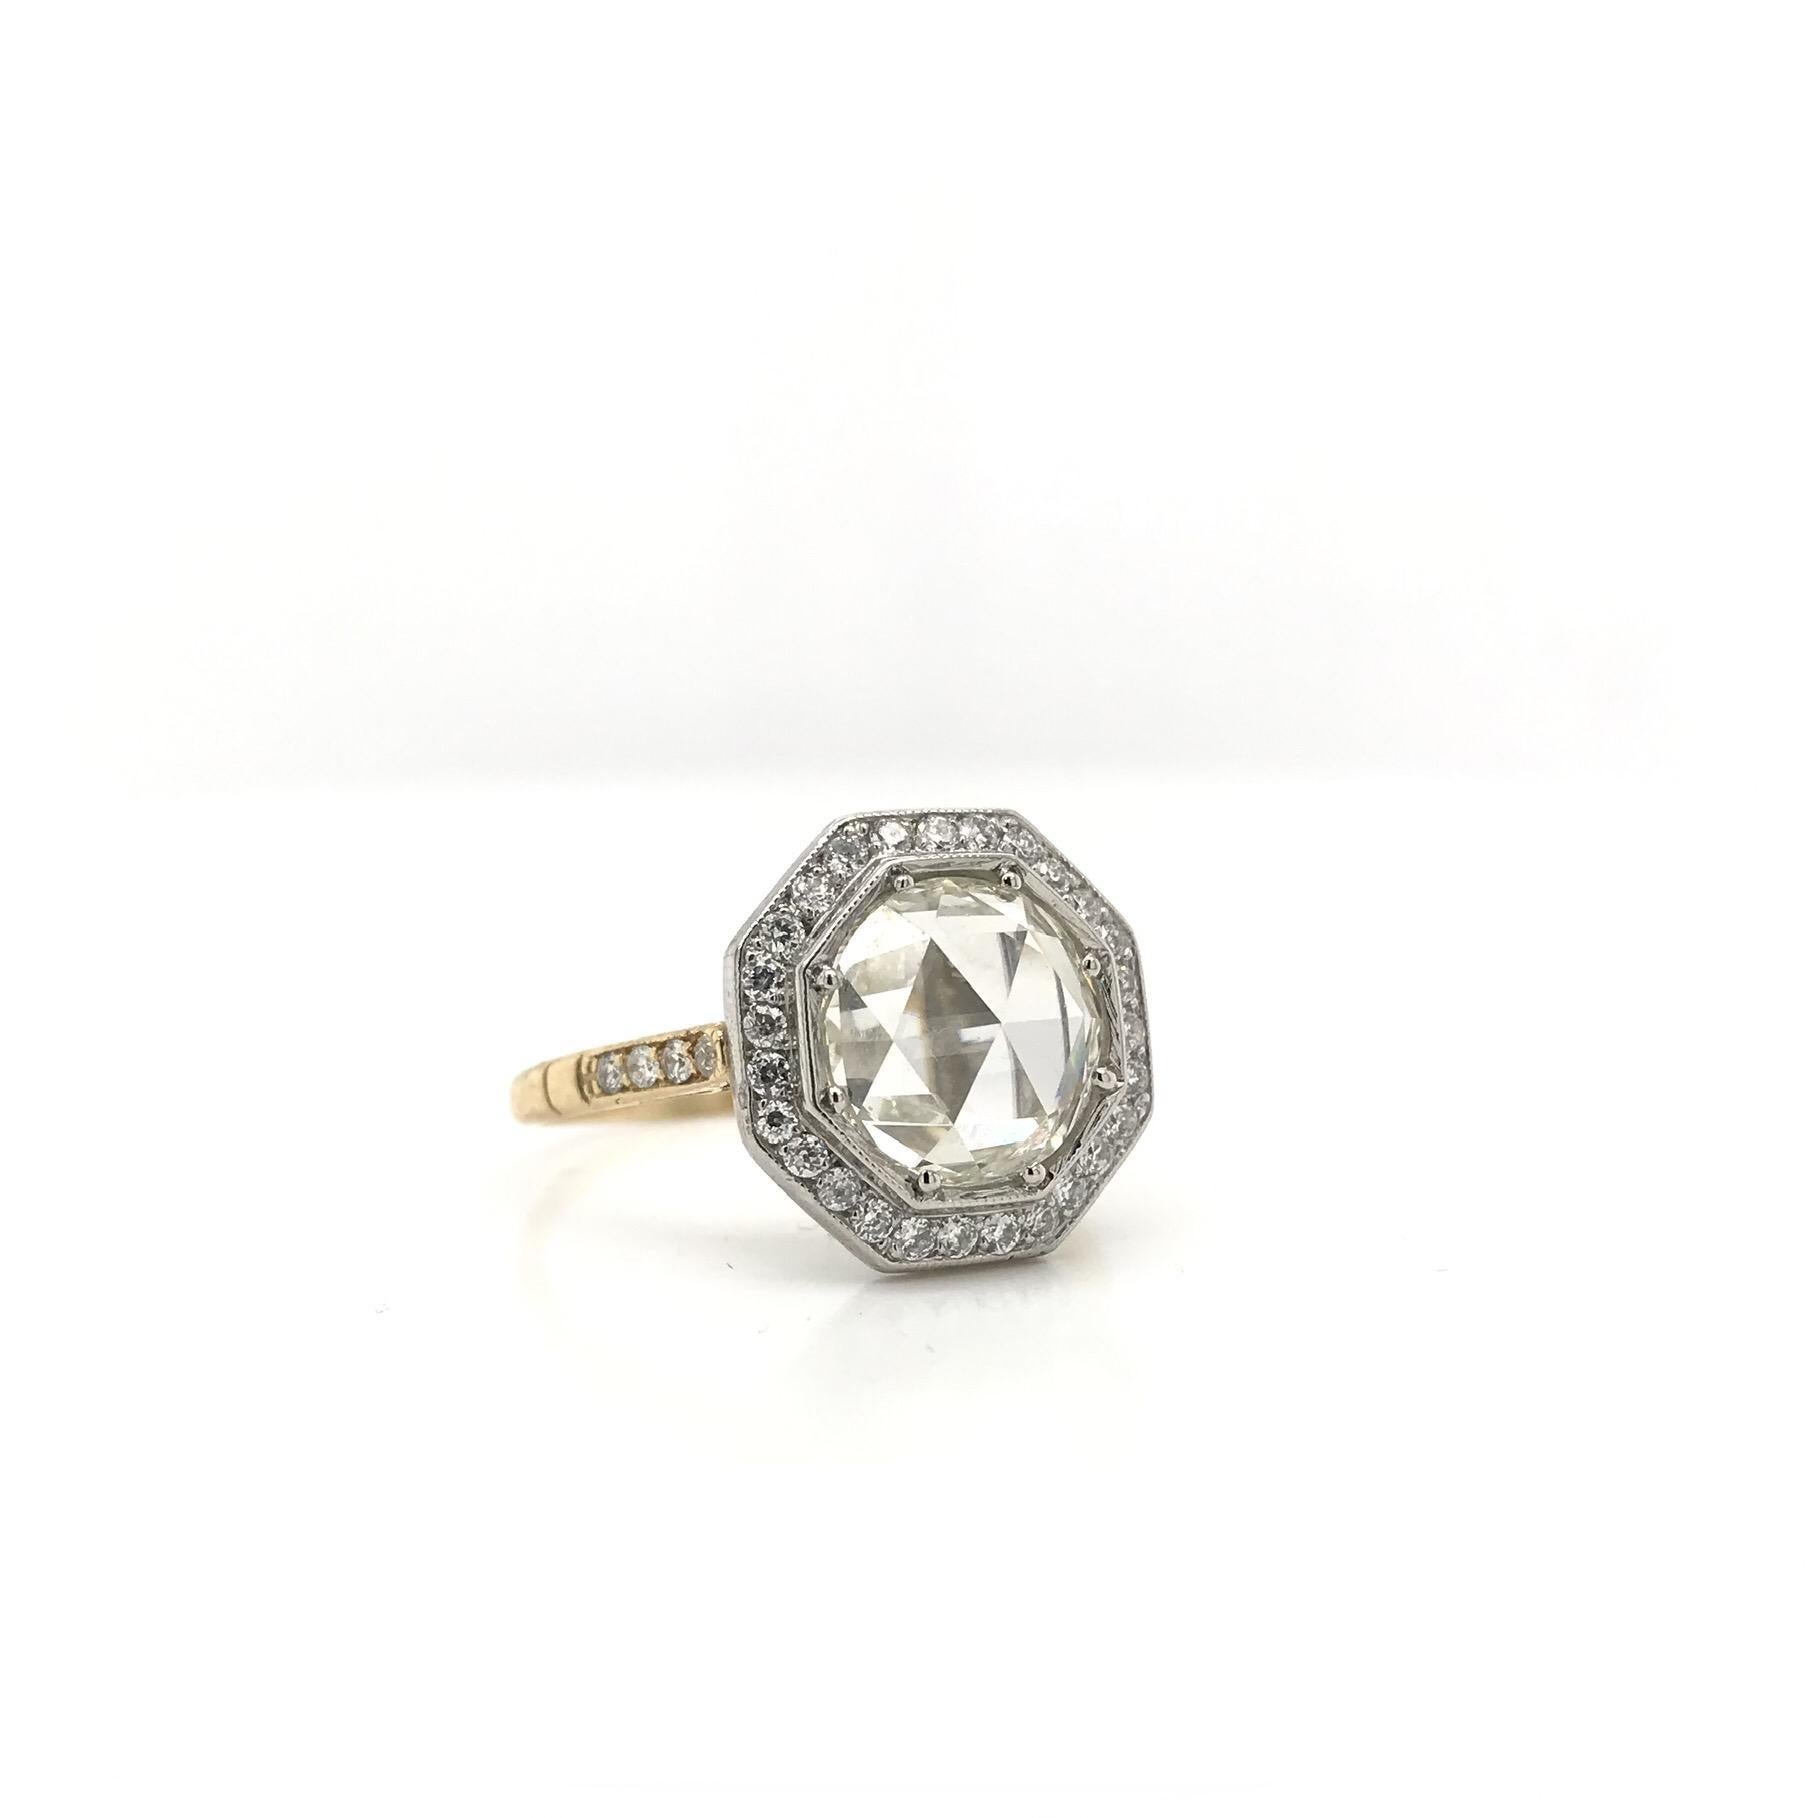 Contemporary Antique Inspired 2.63 Carat Rose Cut Diamond Ring For Sale 1